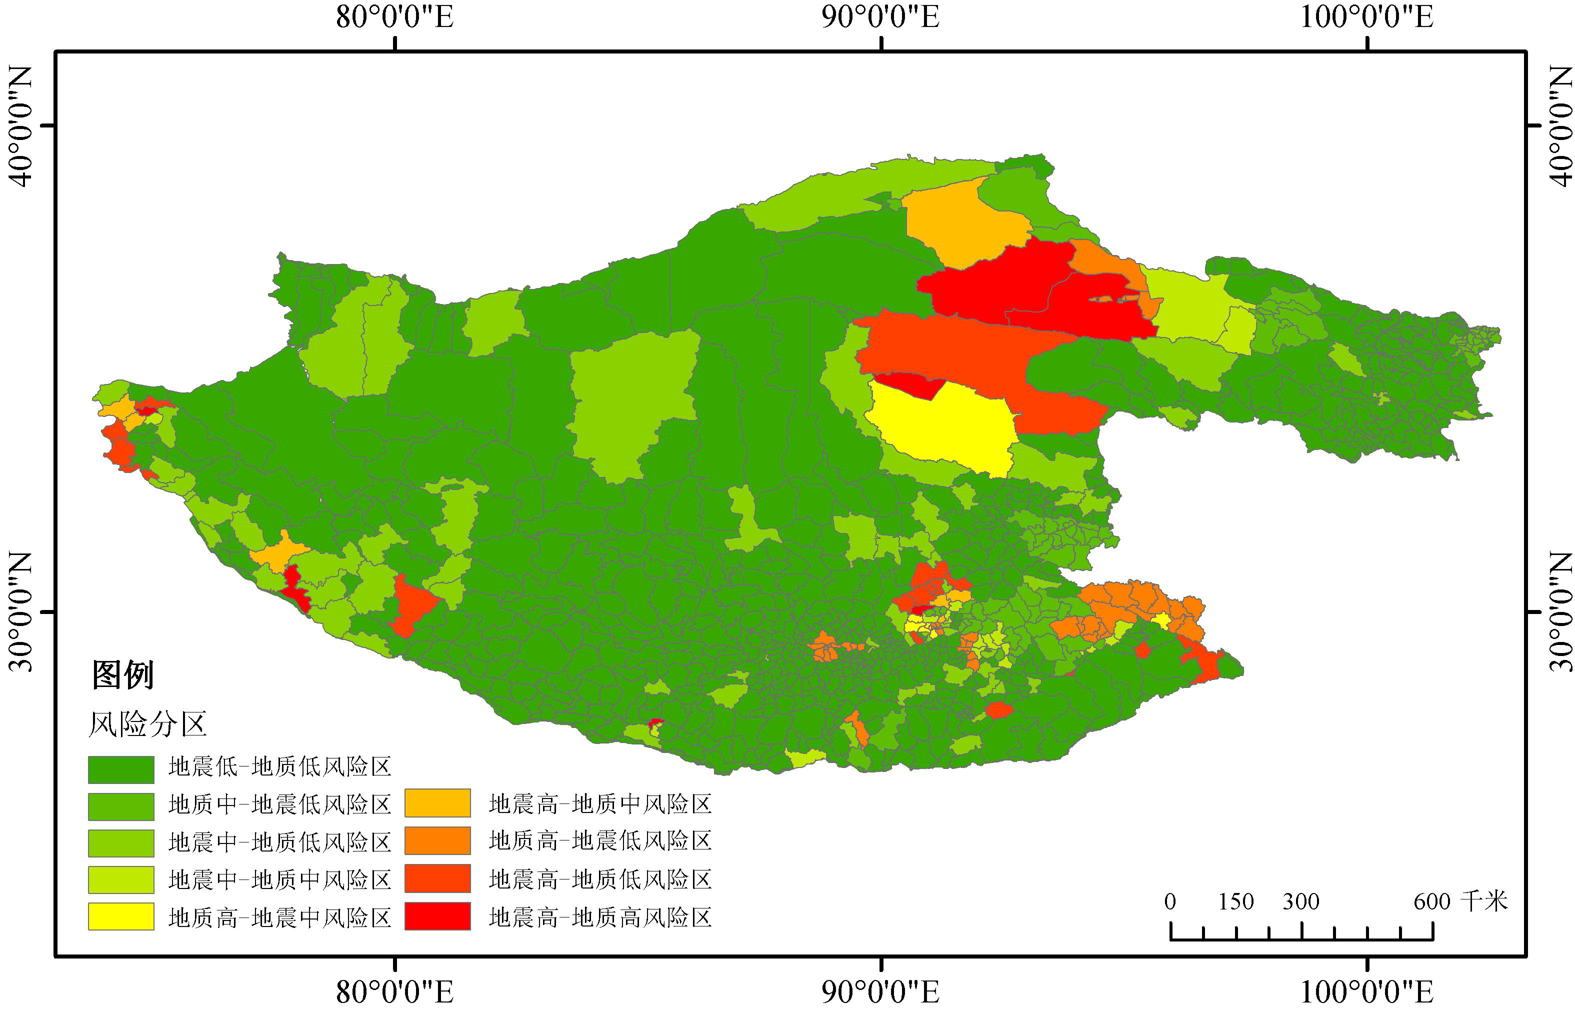 Direct economic loss risk in the Asian Water Tower area and surrounding areas of the Himalayas